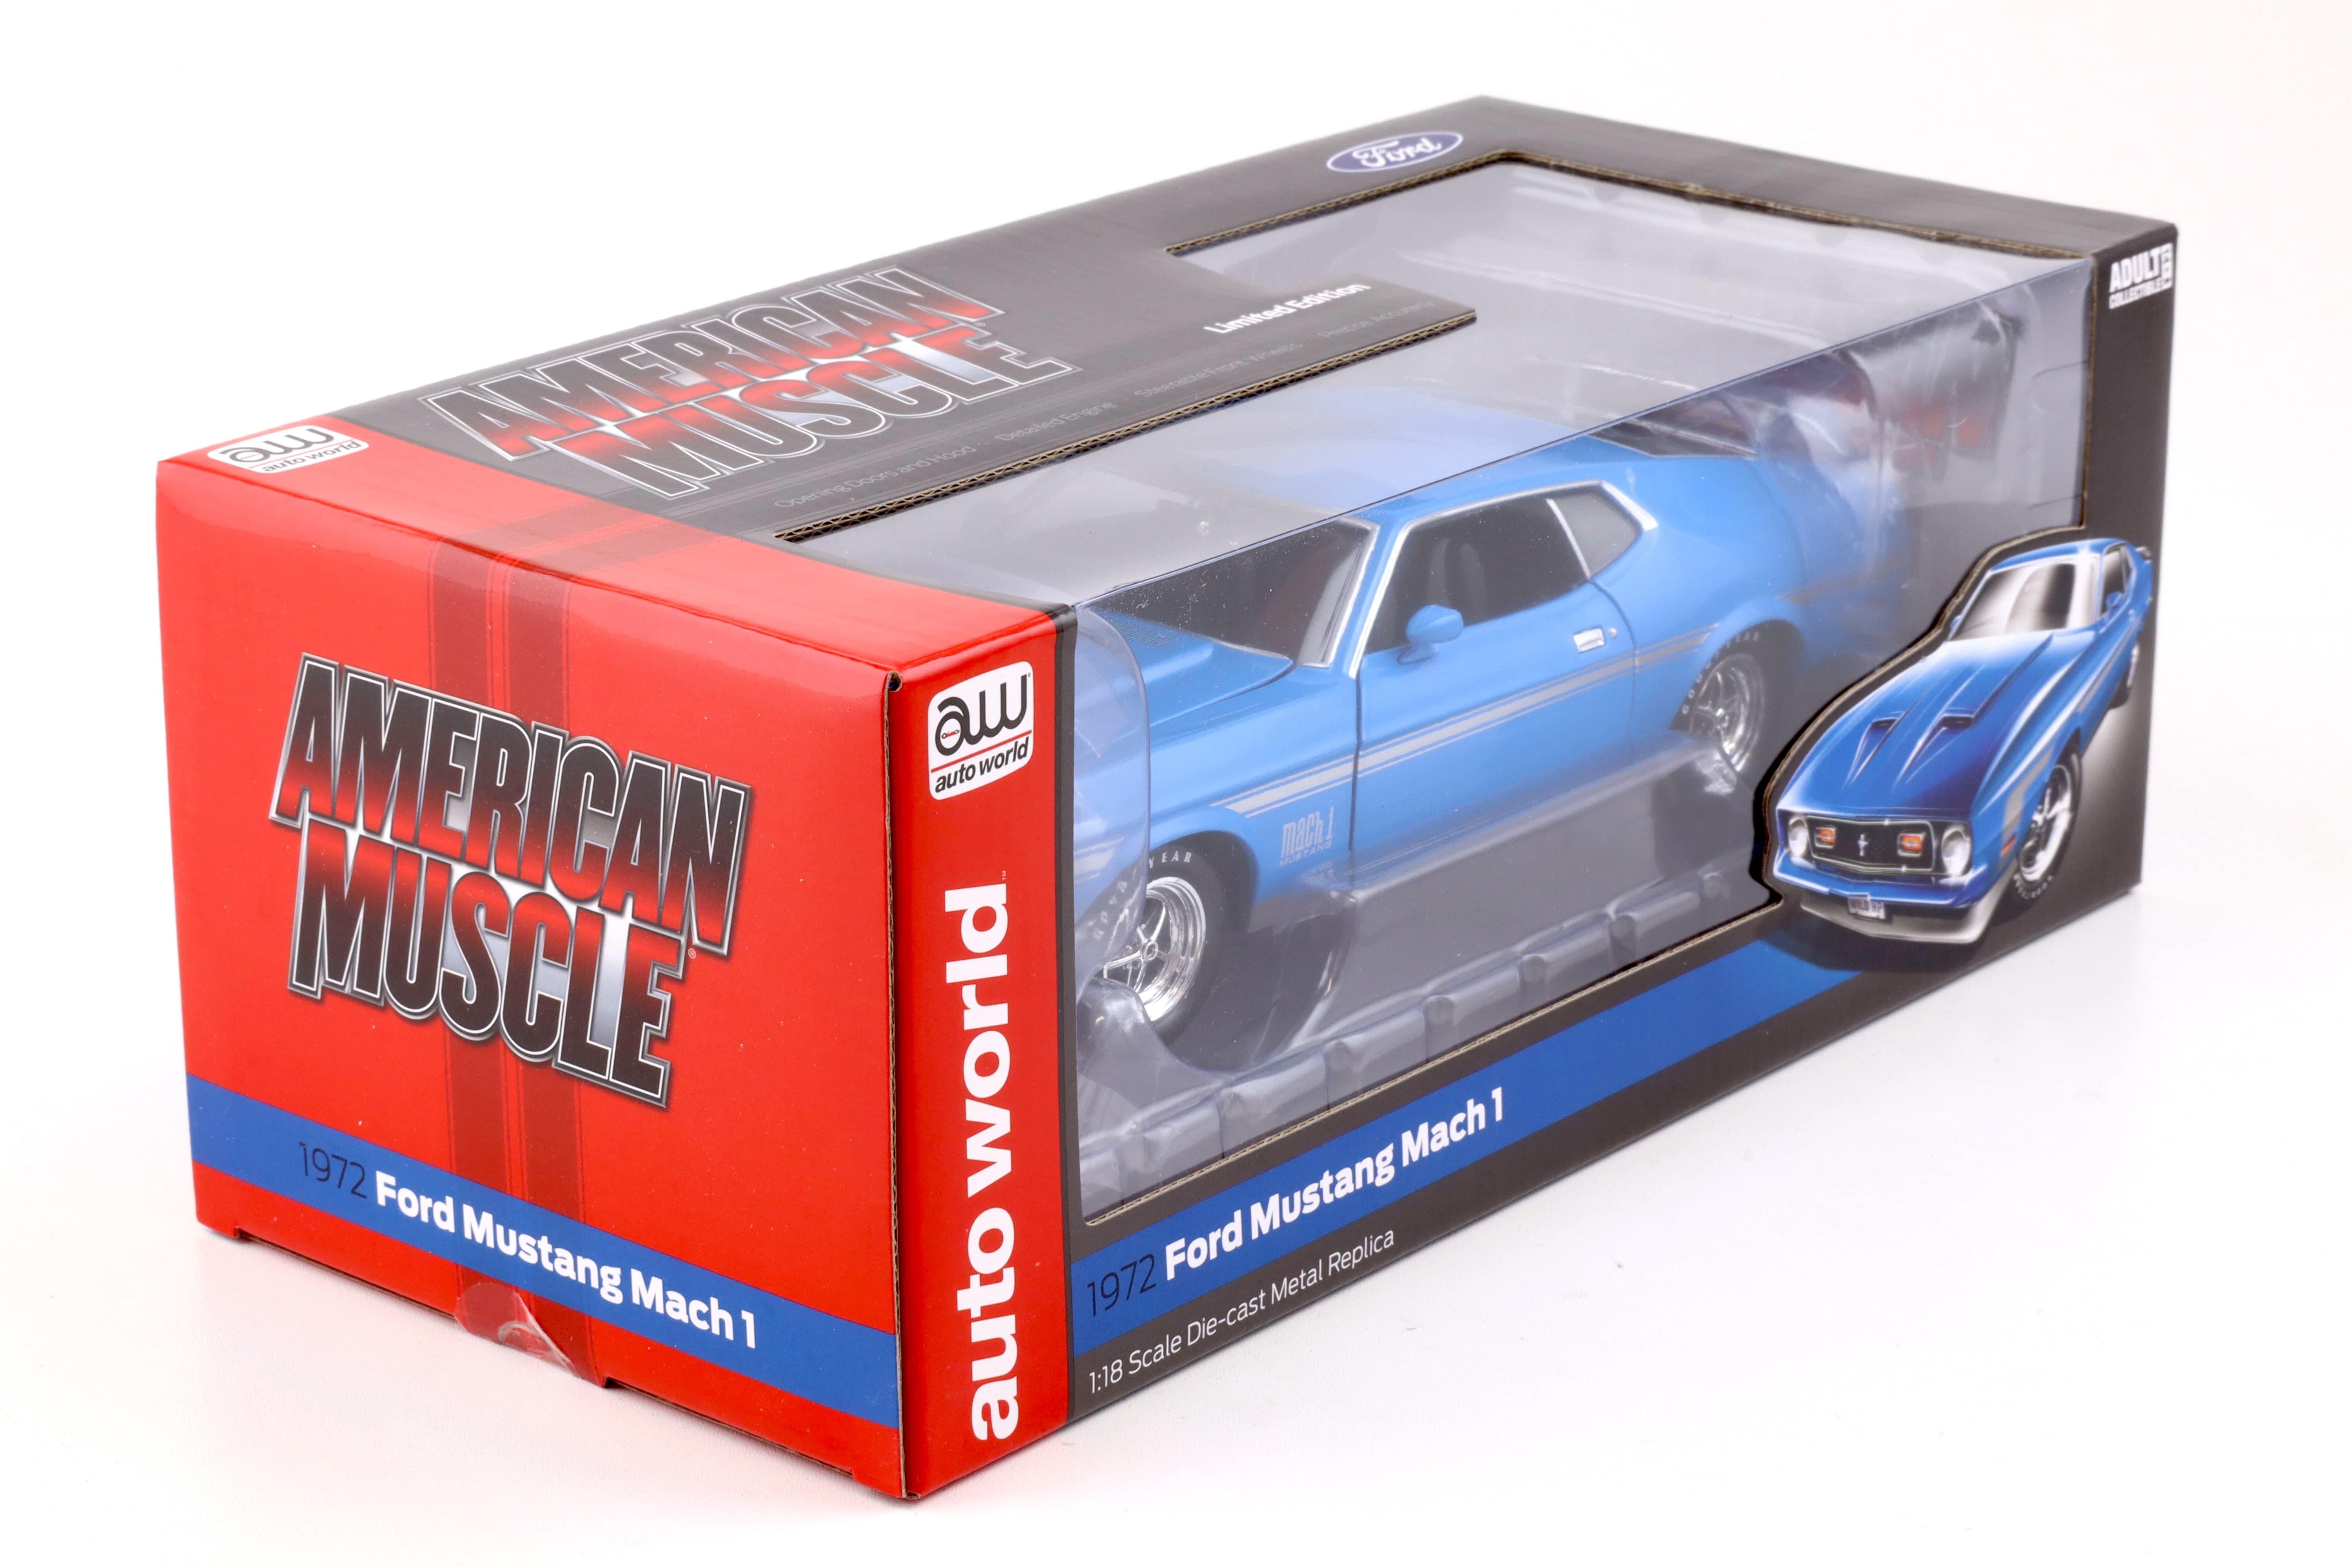 1:18 Auto World 1972 Ford Mustang Mach 1 Coupe Grabber blue 